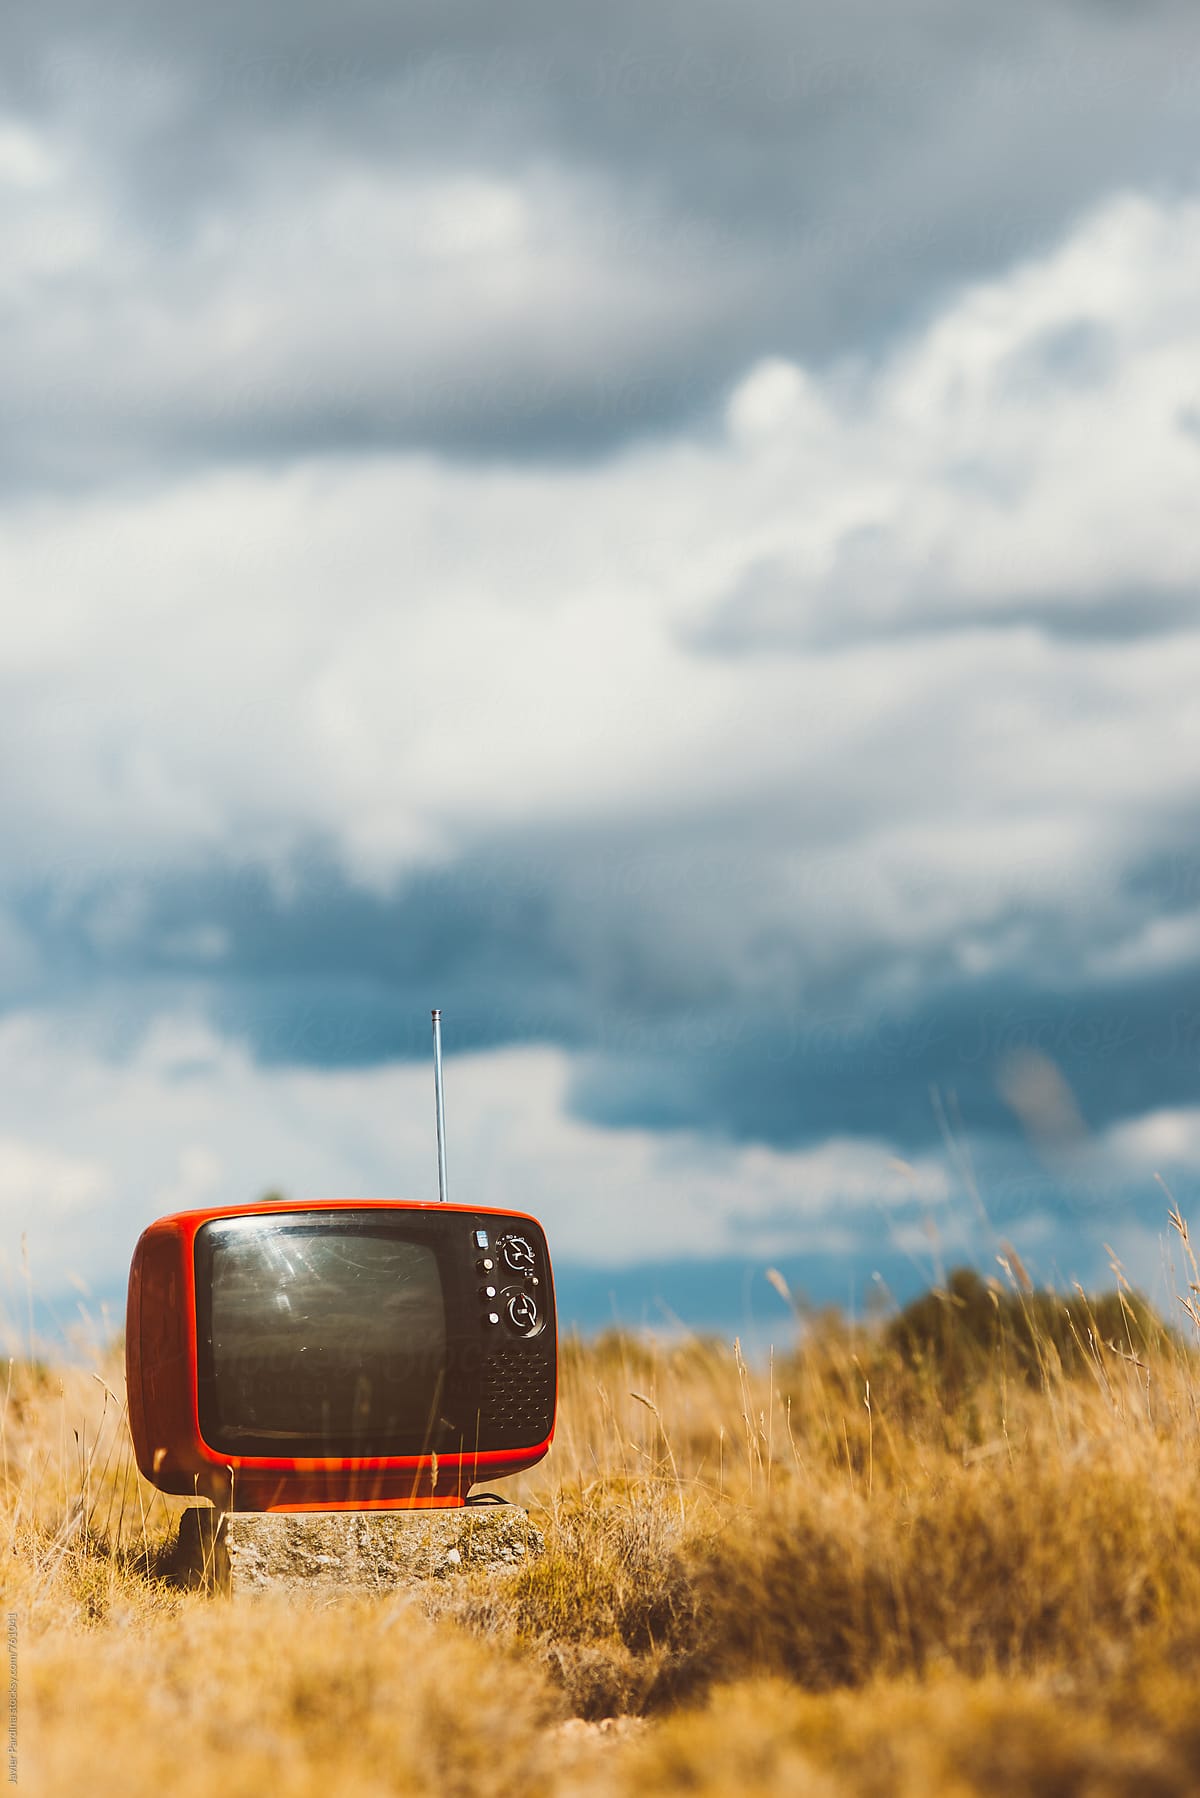 old TV in the dry field